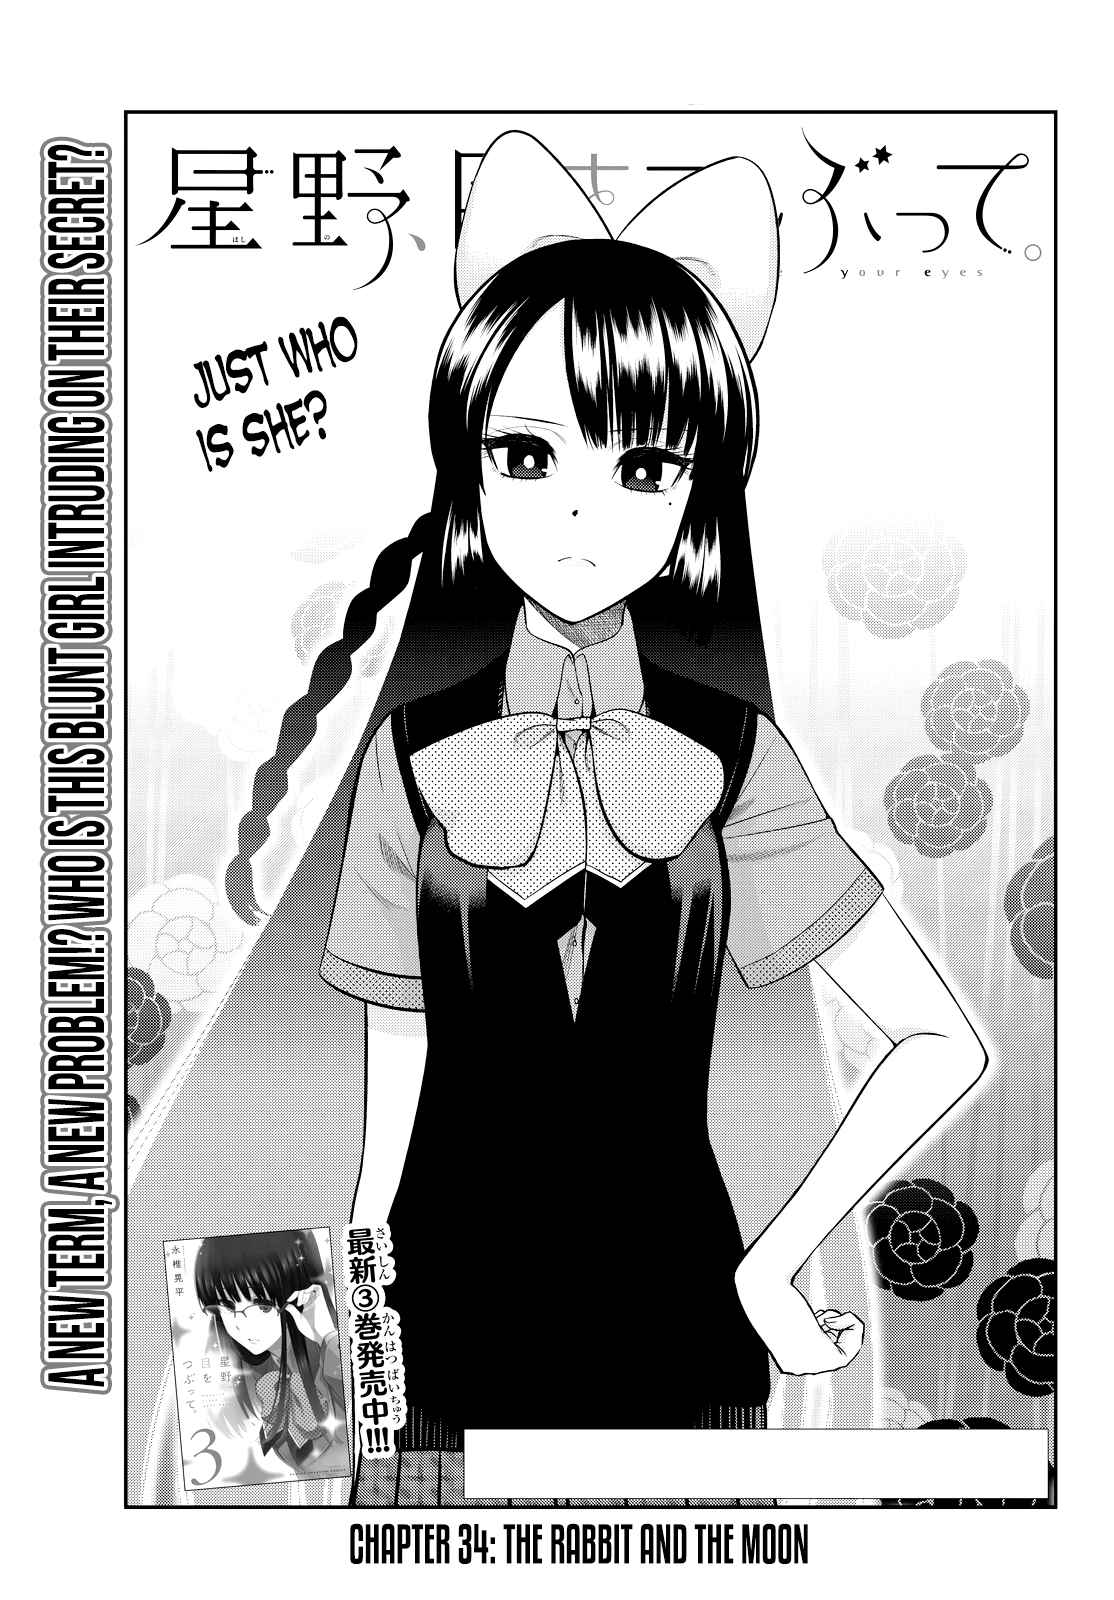 Hoshino, Me O Tsubutte Vol. 5 Ch. 34 The Rabbit And The Moon